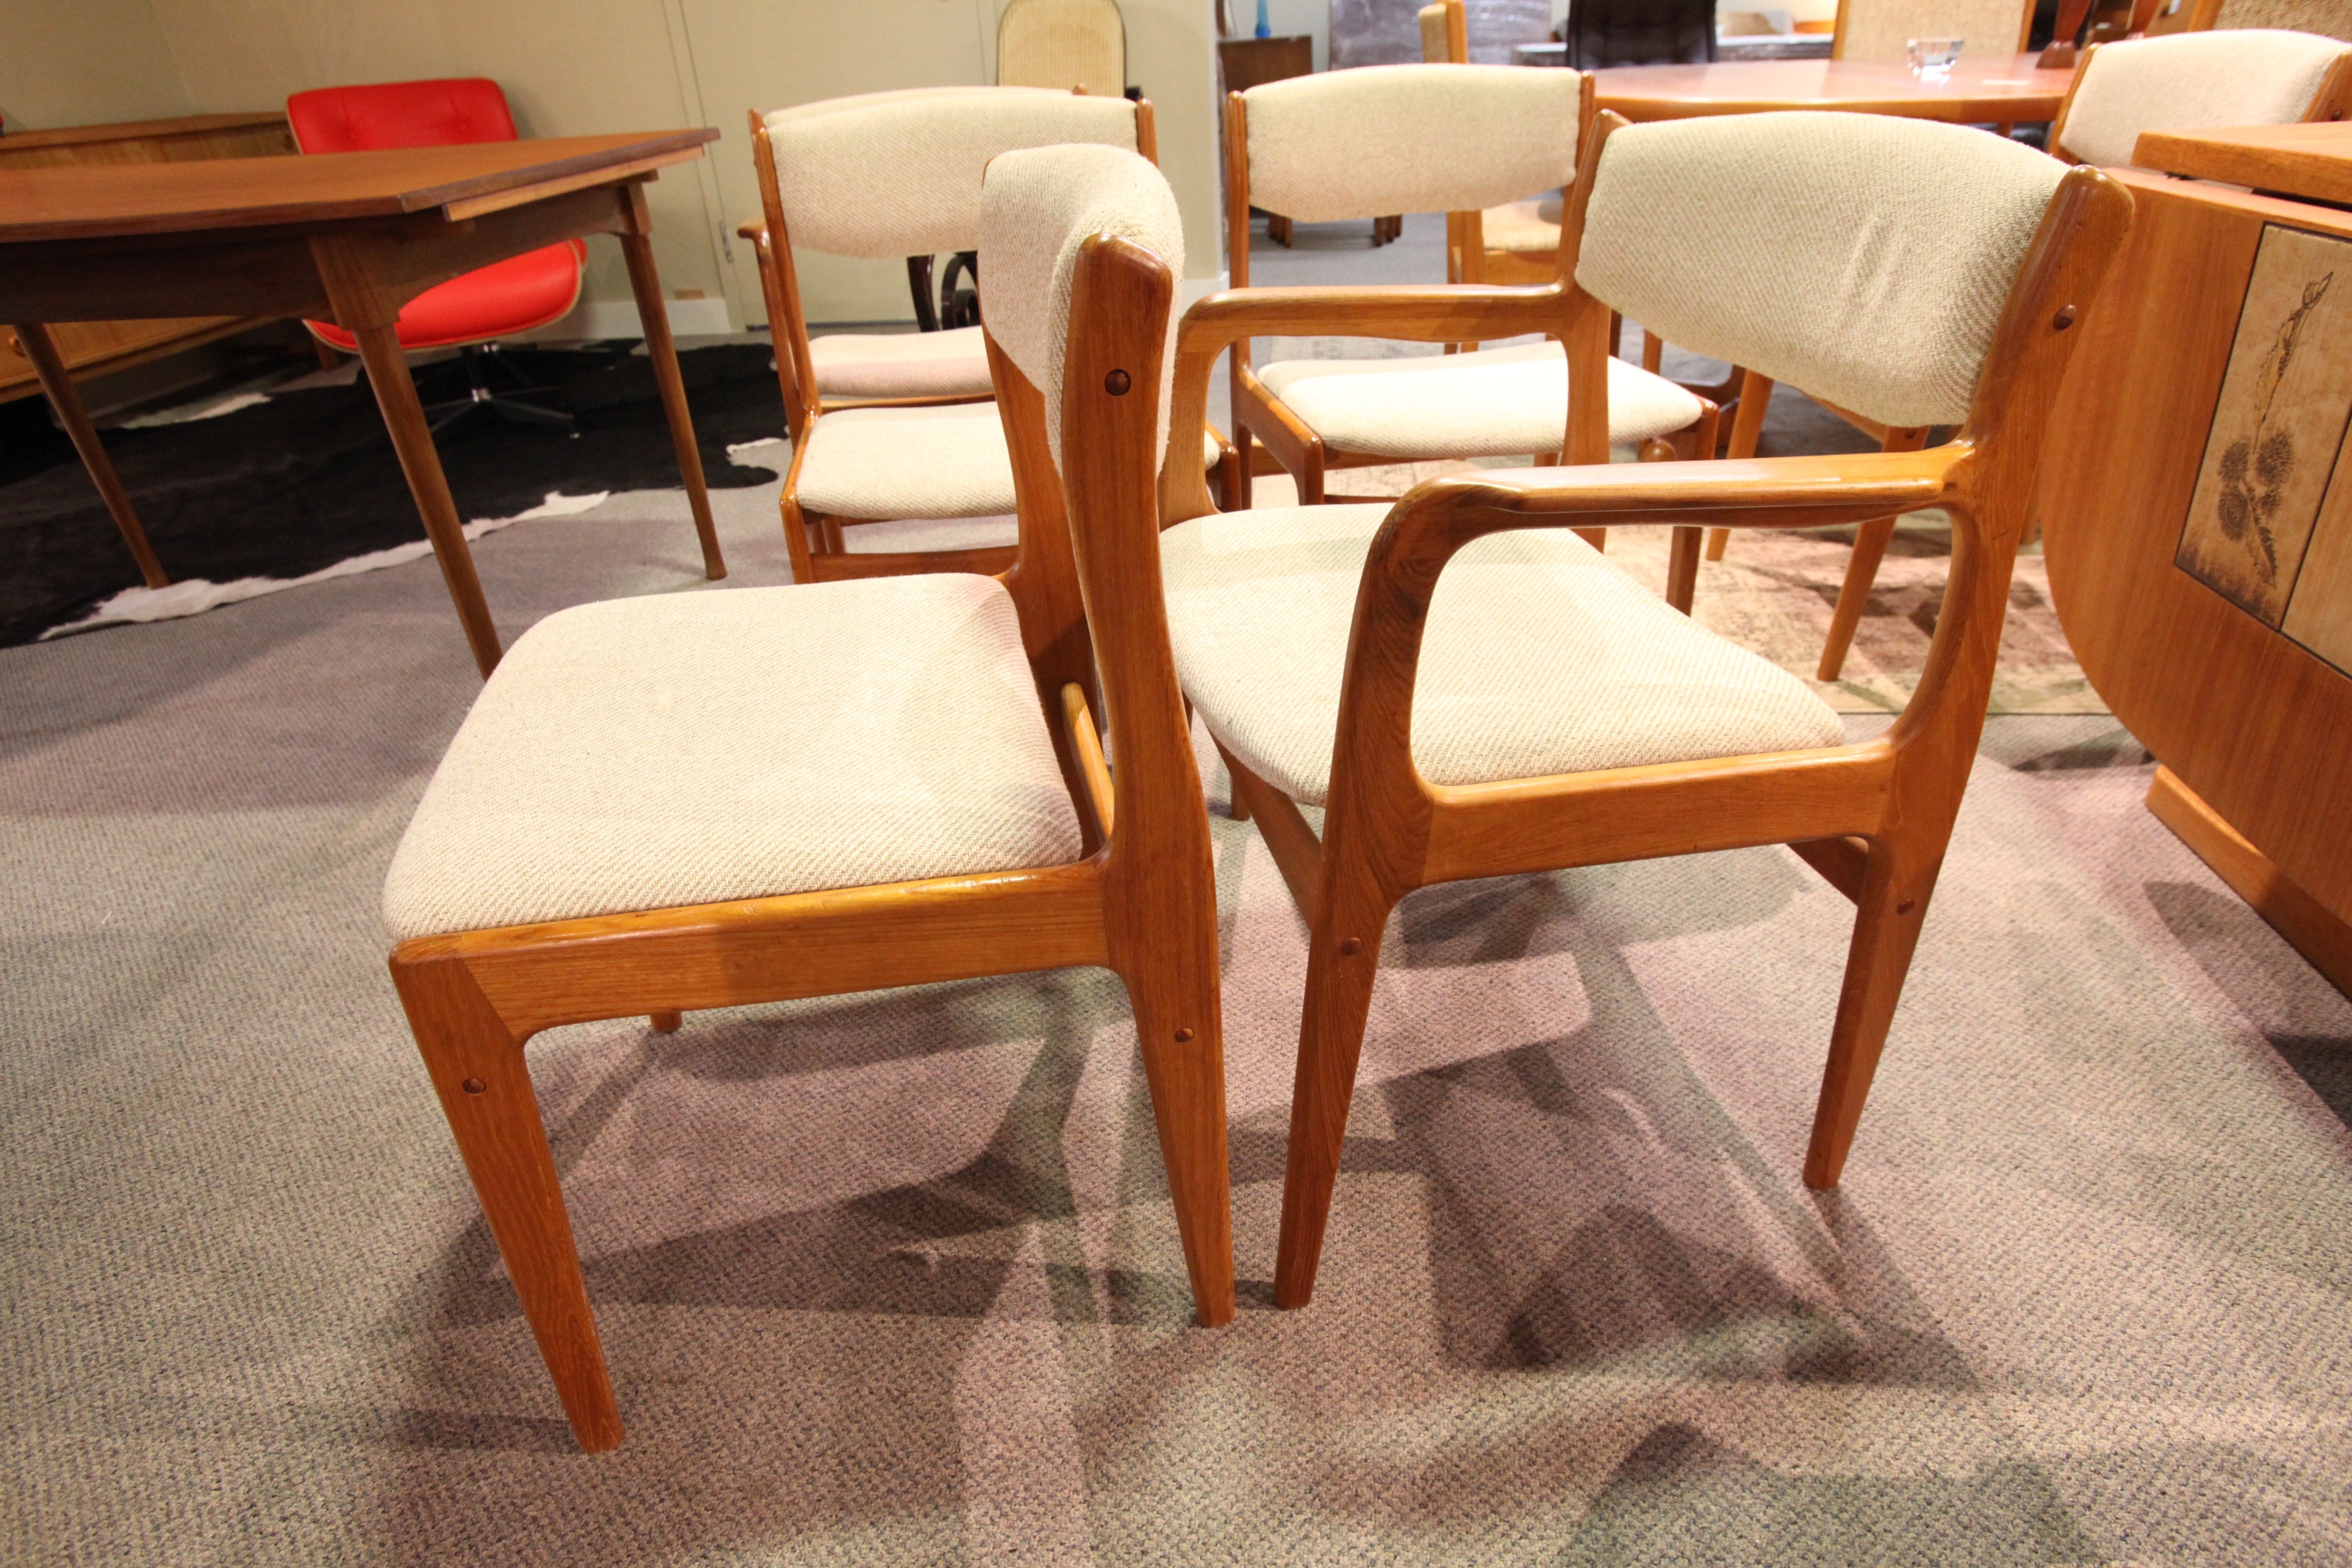 Set of 6 Teak Chairs (4 chairs, 2 arm chairs)